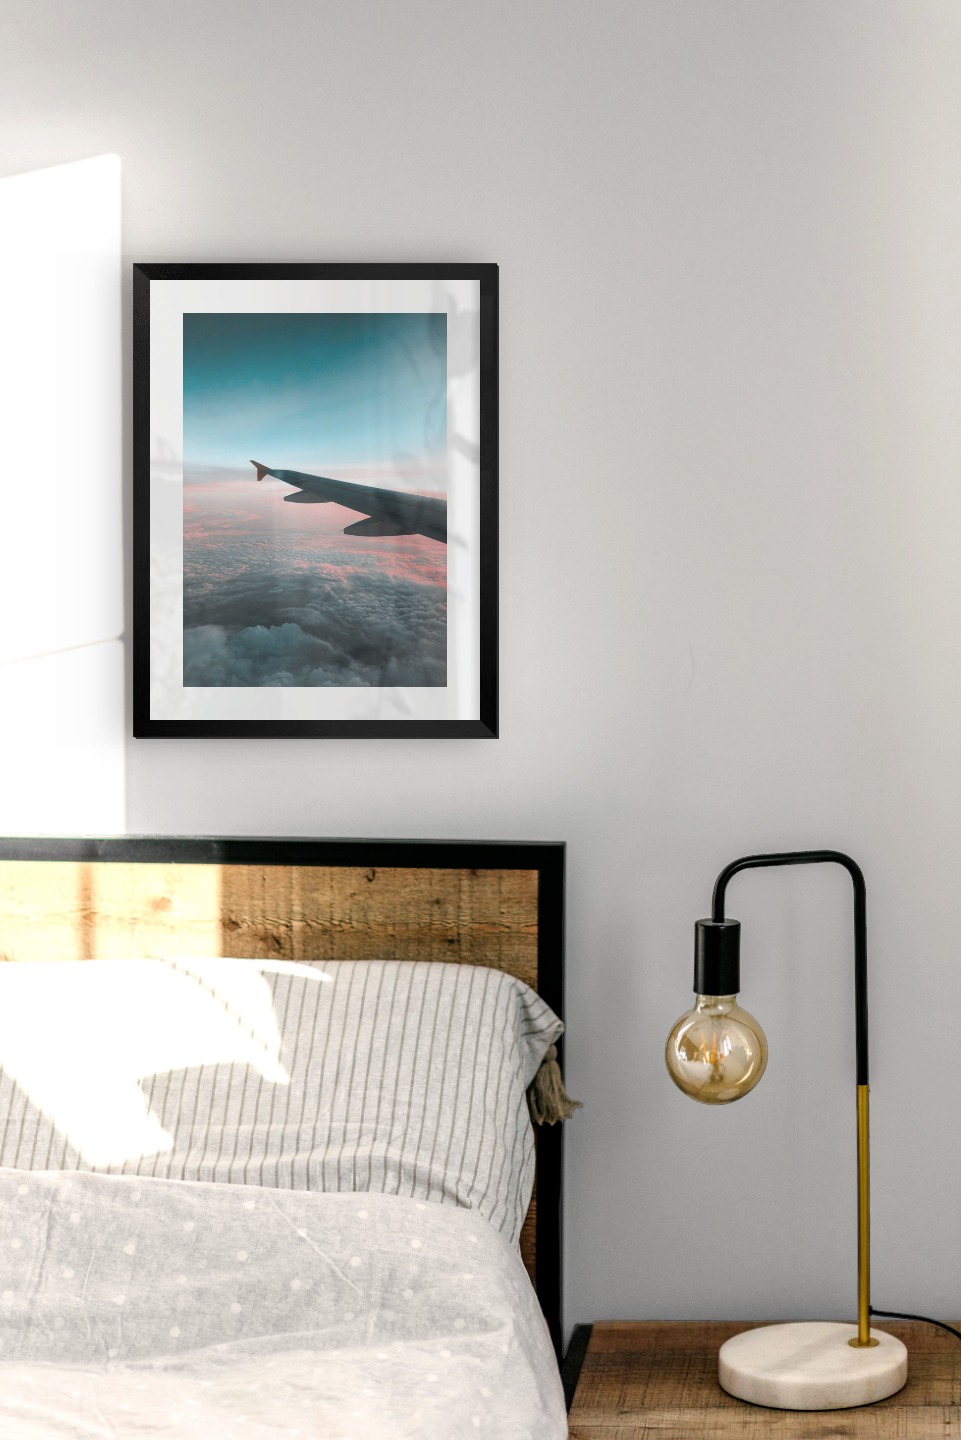 Gallery wall with picture frame in black in size 30x40 with print "Above the clouds"